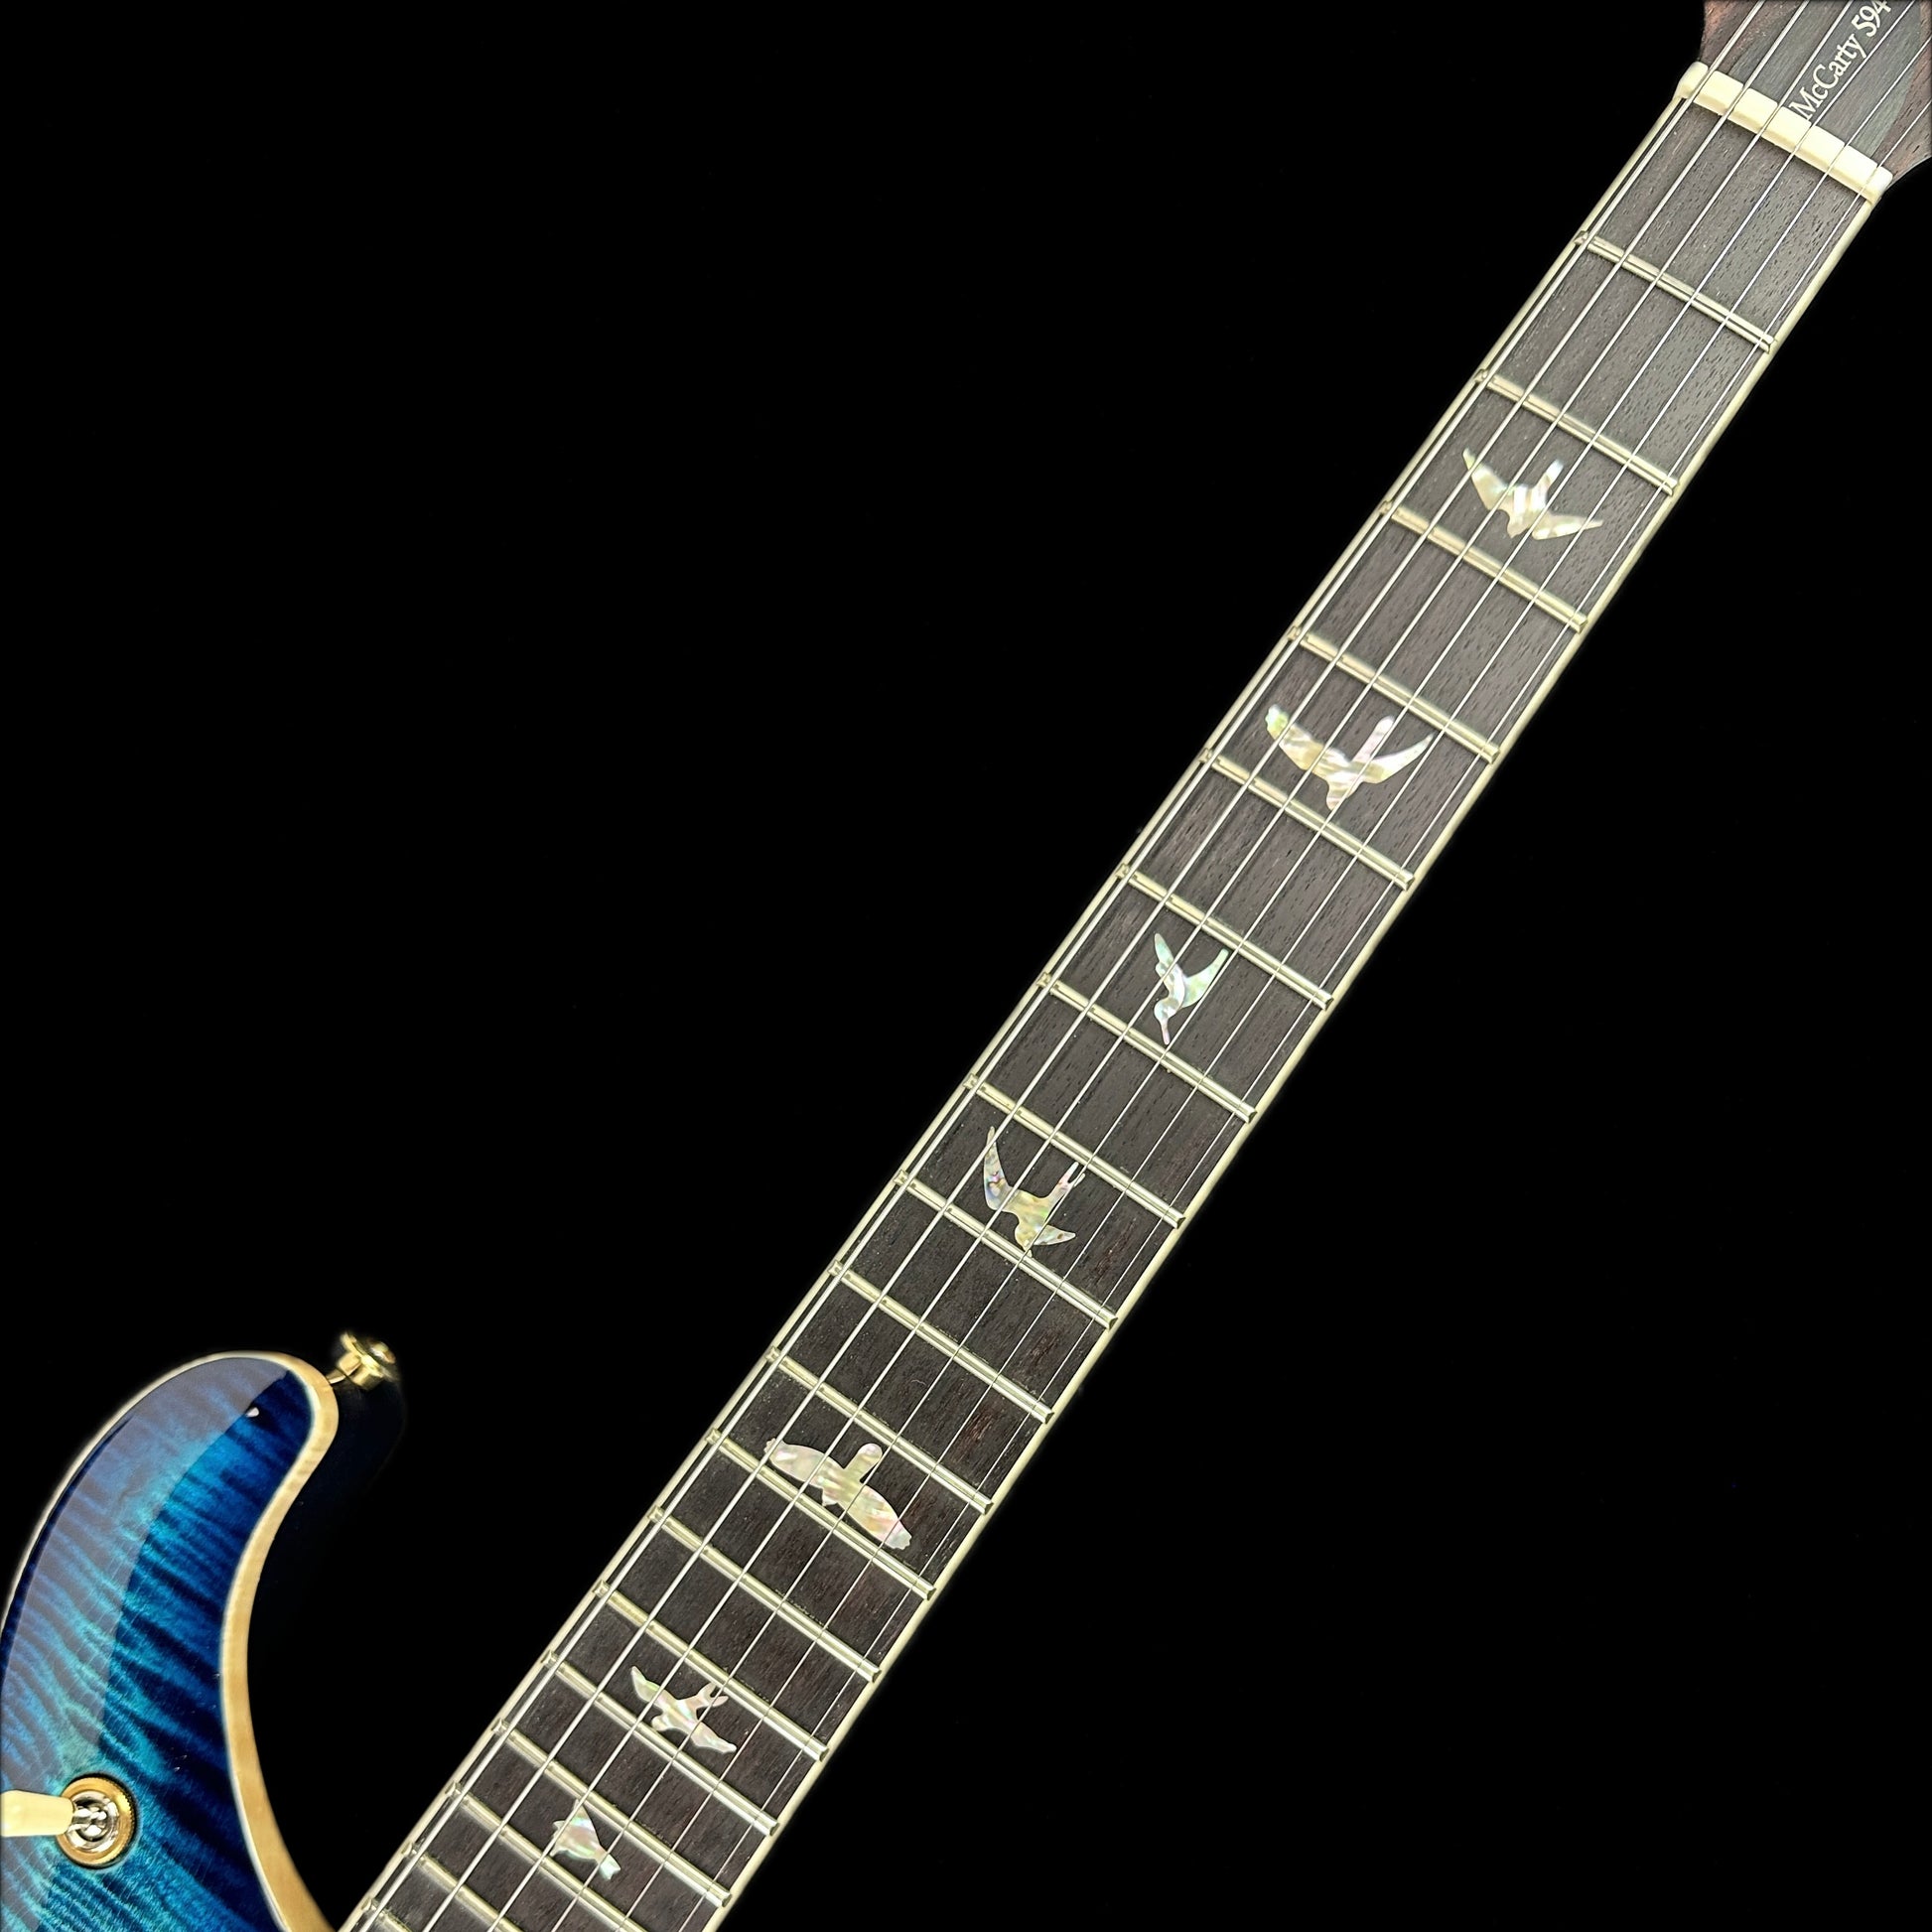 Fretboard of PRS Paul Reed Smith McCarty 594 Cobalt Blue 10 Top.